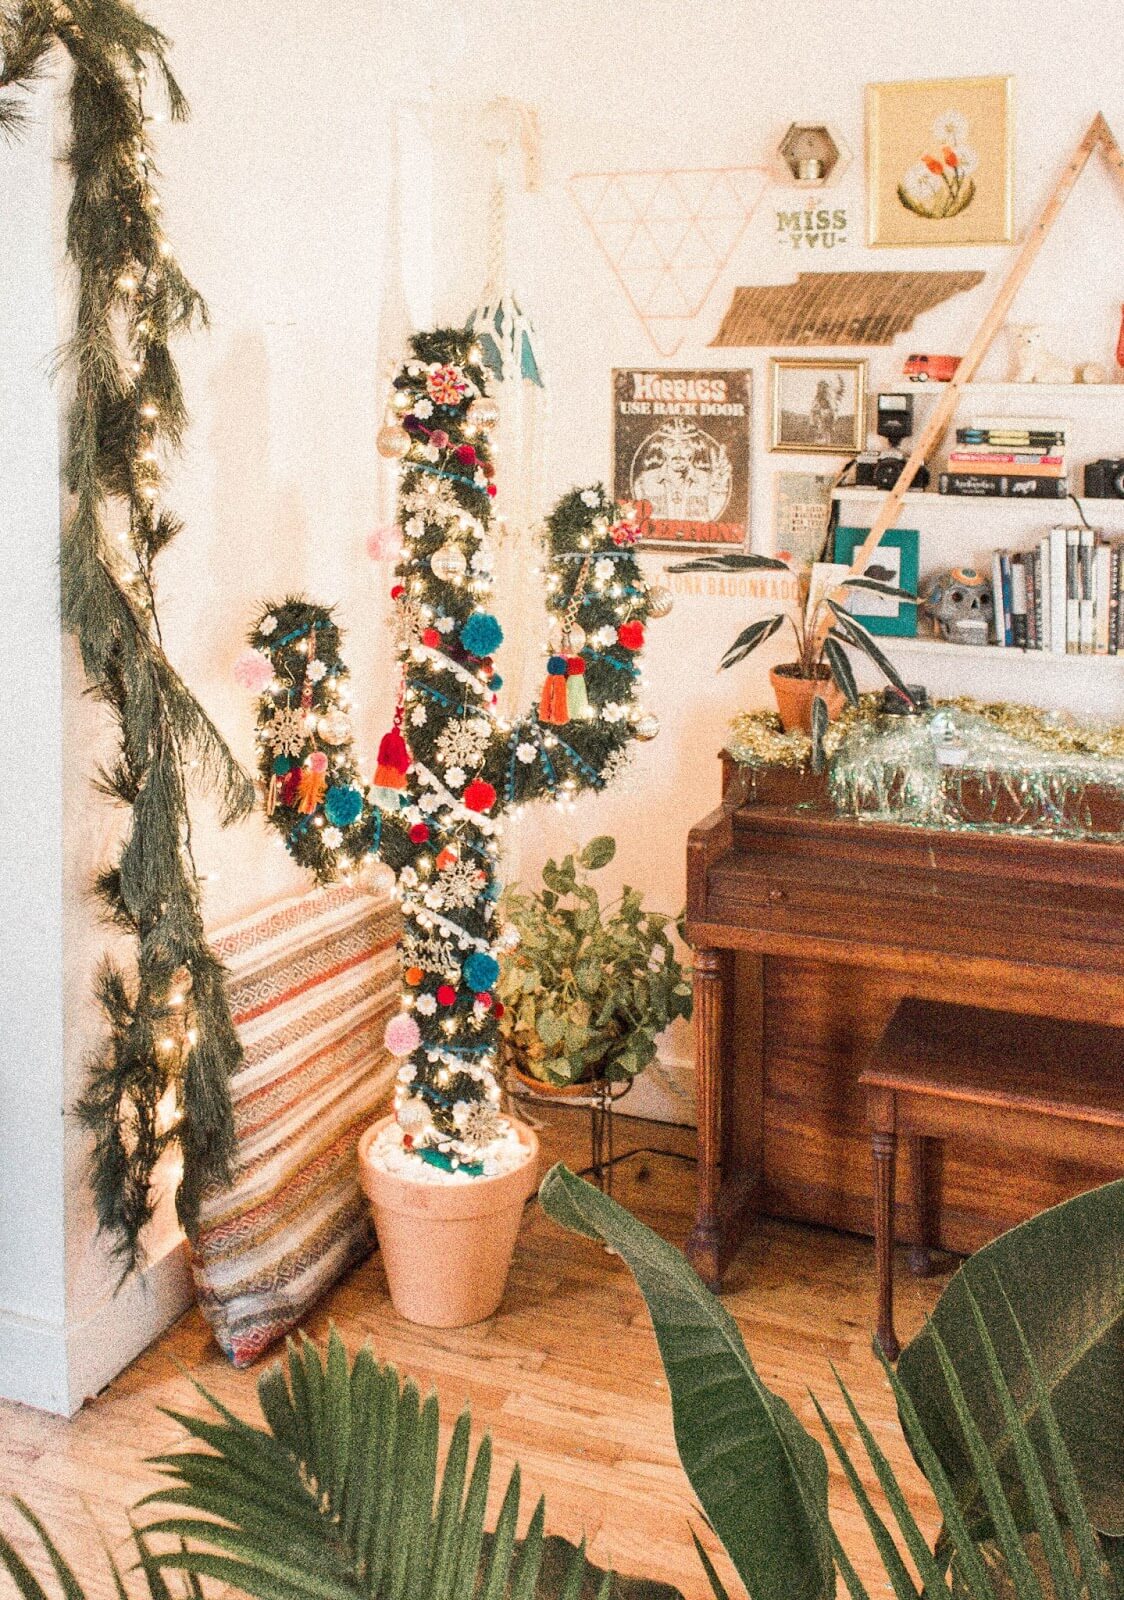 Handmade Cactus Christmas Tree Craft With Pipe, Wood Duct Tape